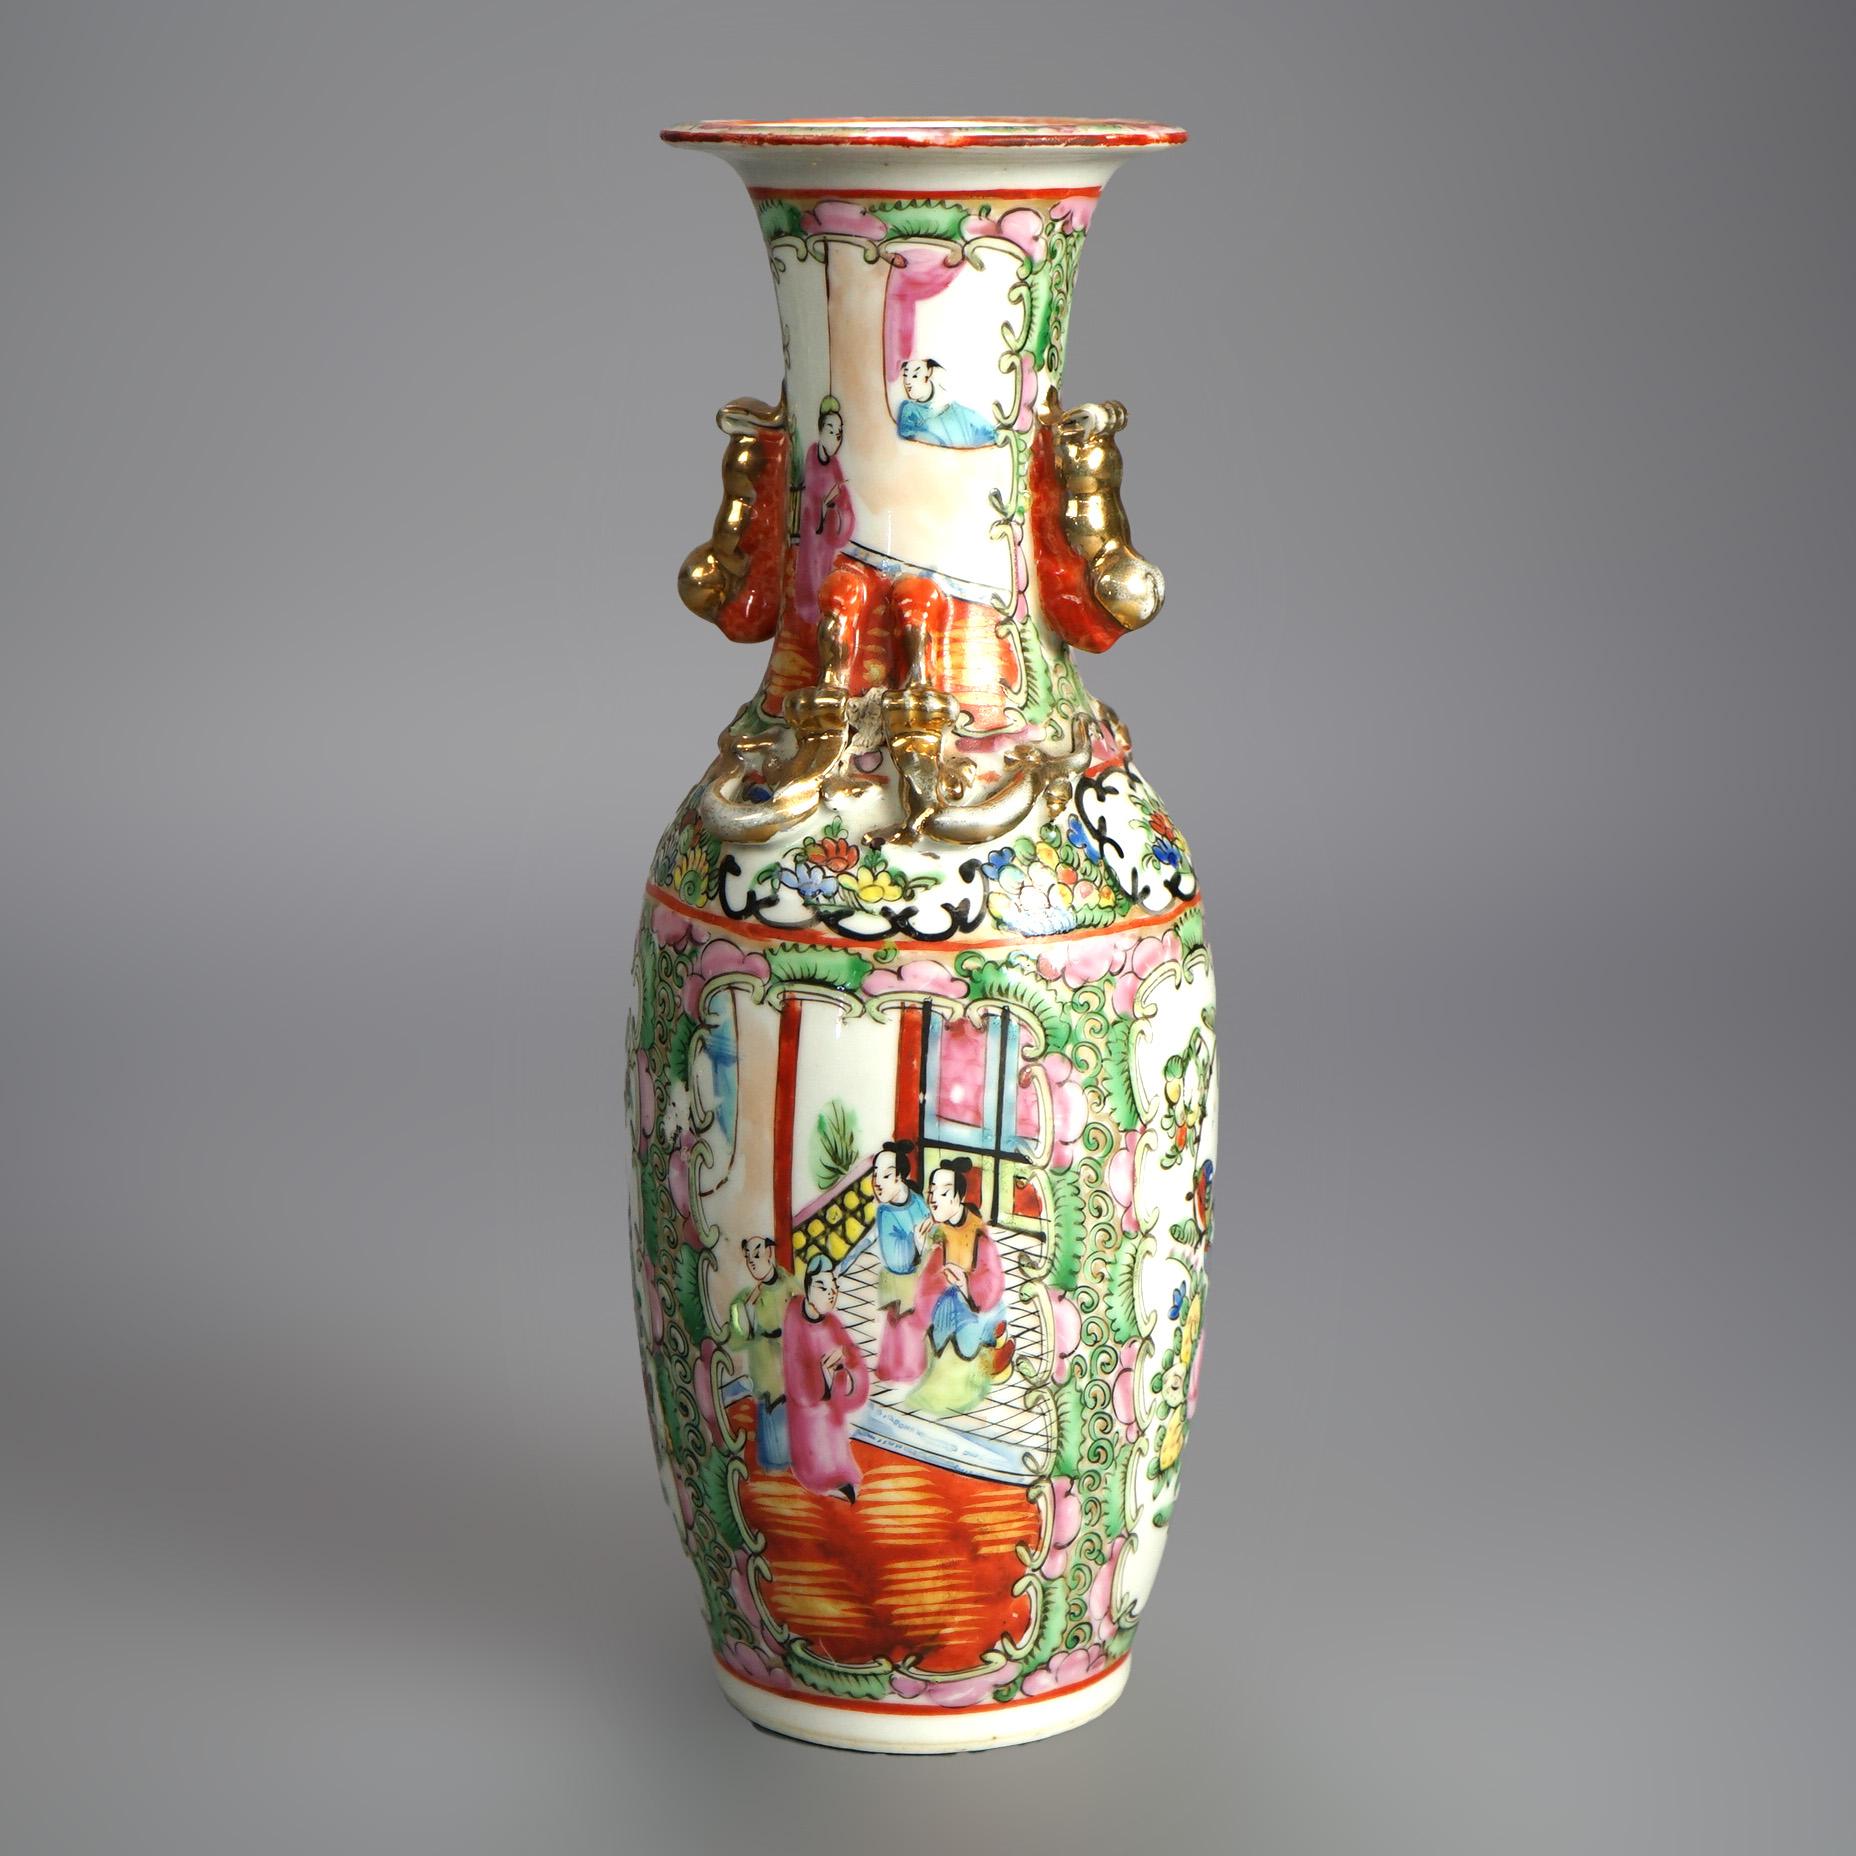 Antique Chinese Rose Medallion Porcelain Double Handled Vase with Garden and Genre Scenes c1900

Measures - 11.5